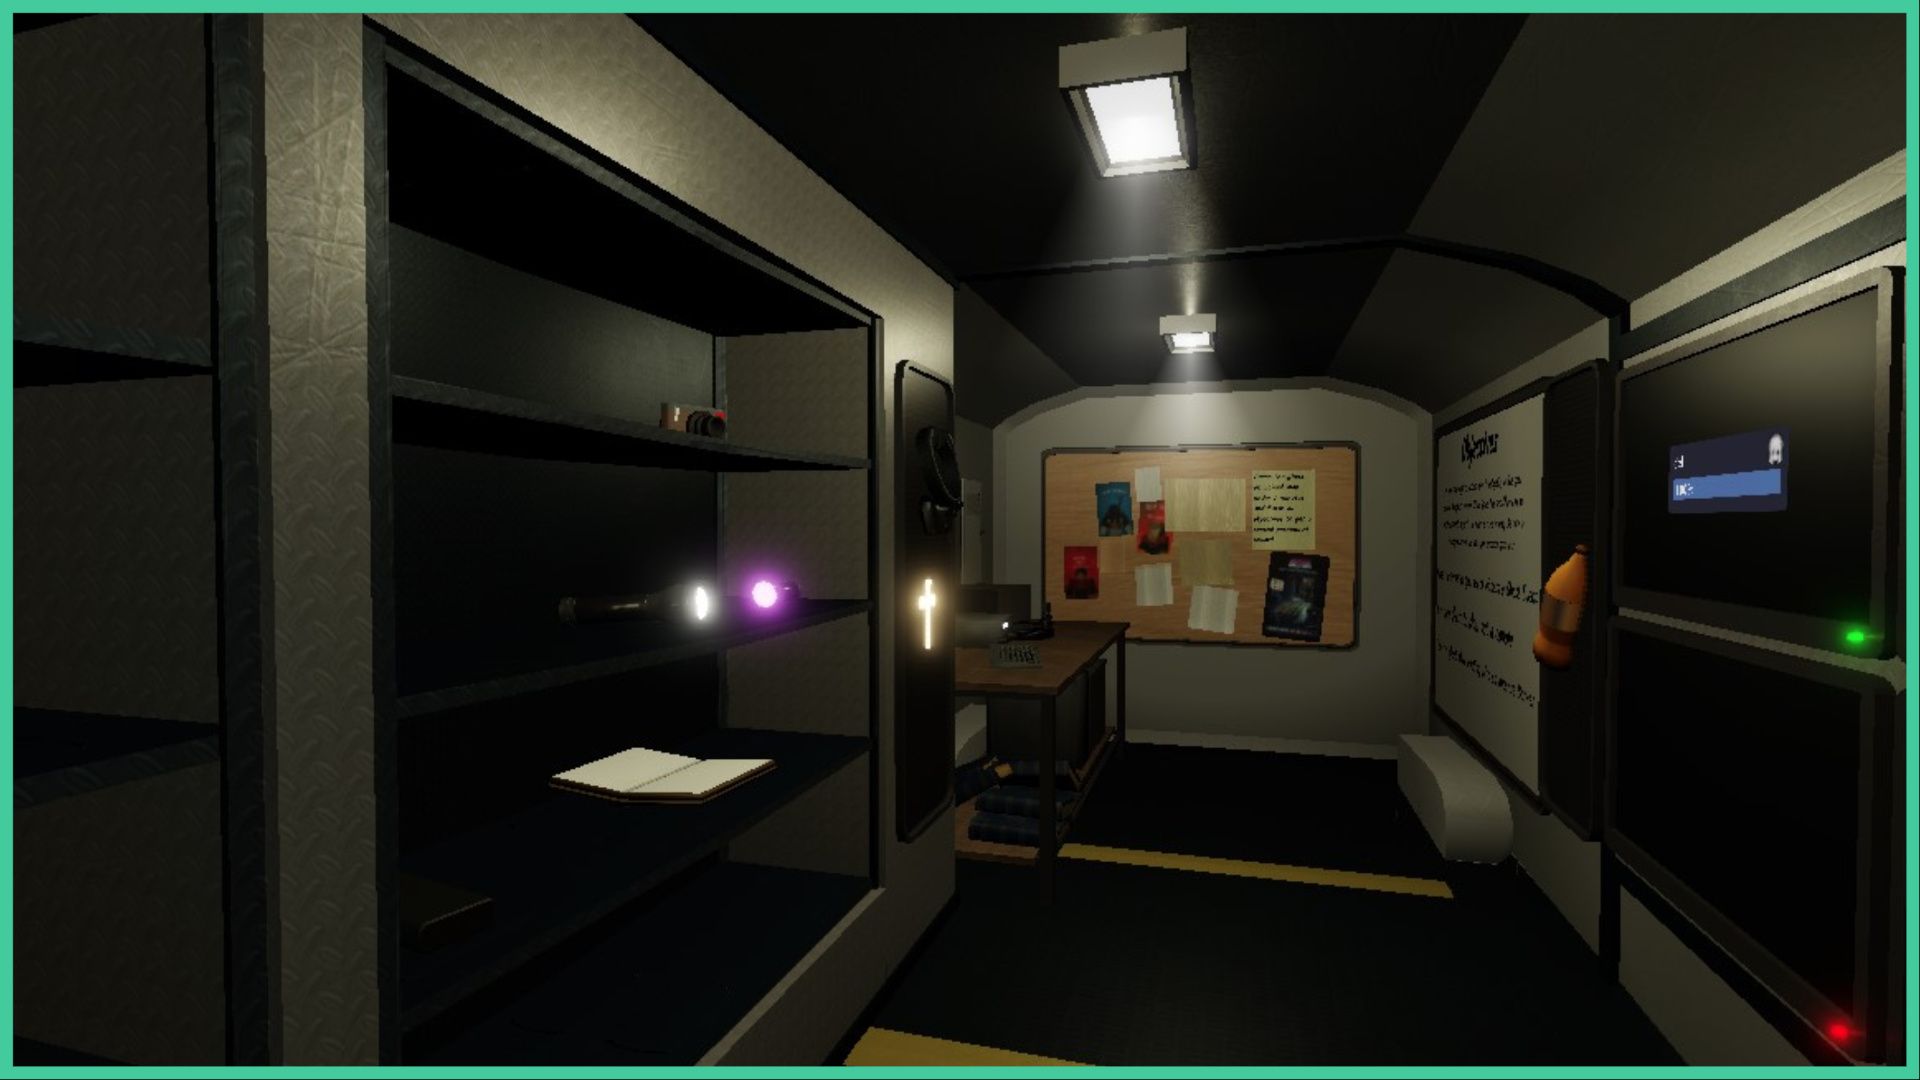 feature image for our blair roblox ghosts guide, the image features a screenshot from inside the van, with the ghost hunting equipment on the shelves to the side including a flashlight, camera, and open notebook, there is a board with paper and posts attached, screens to the right for cameras, and a whiteboard with writing on it about the mission